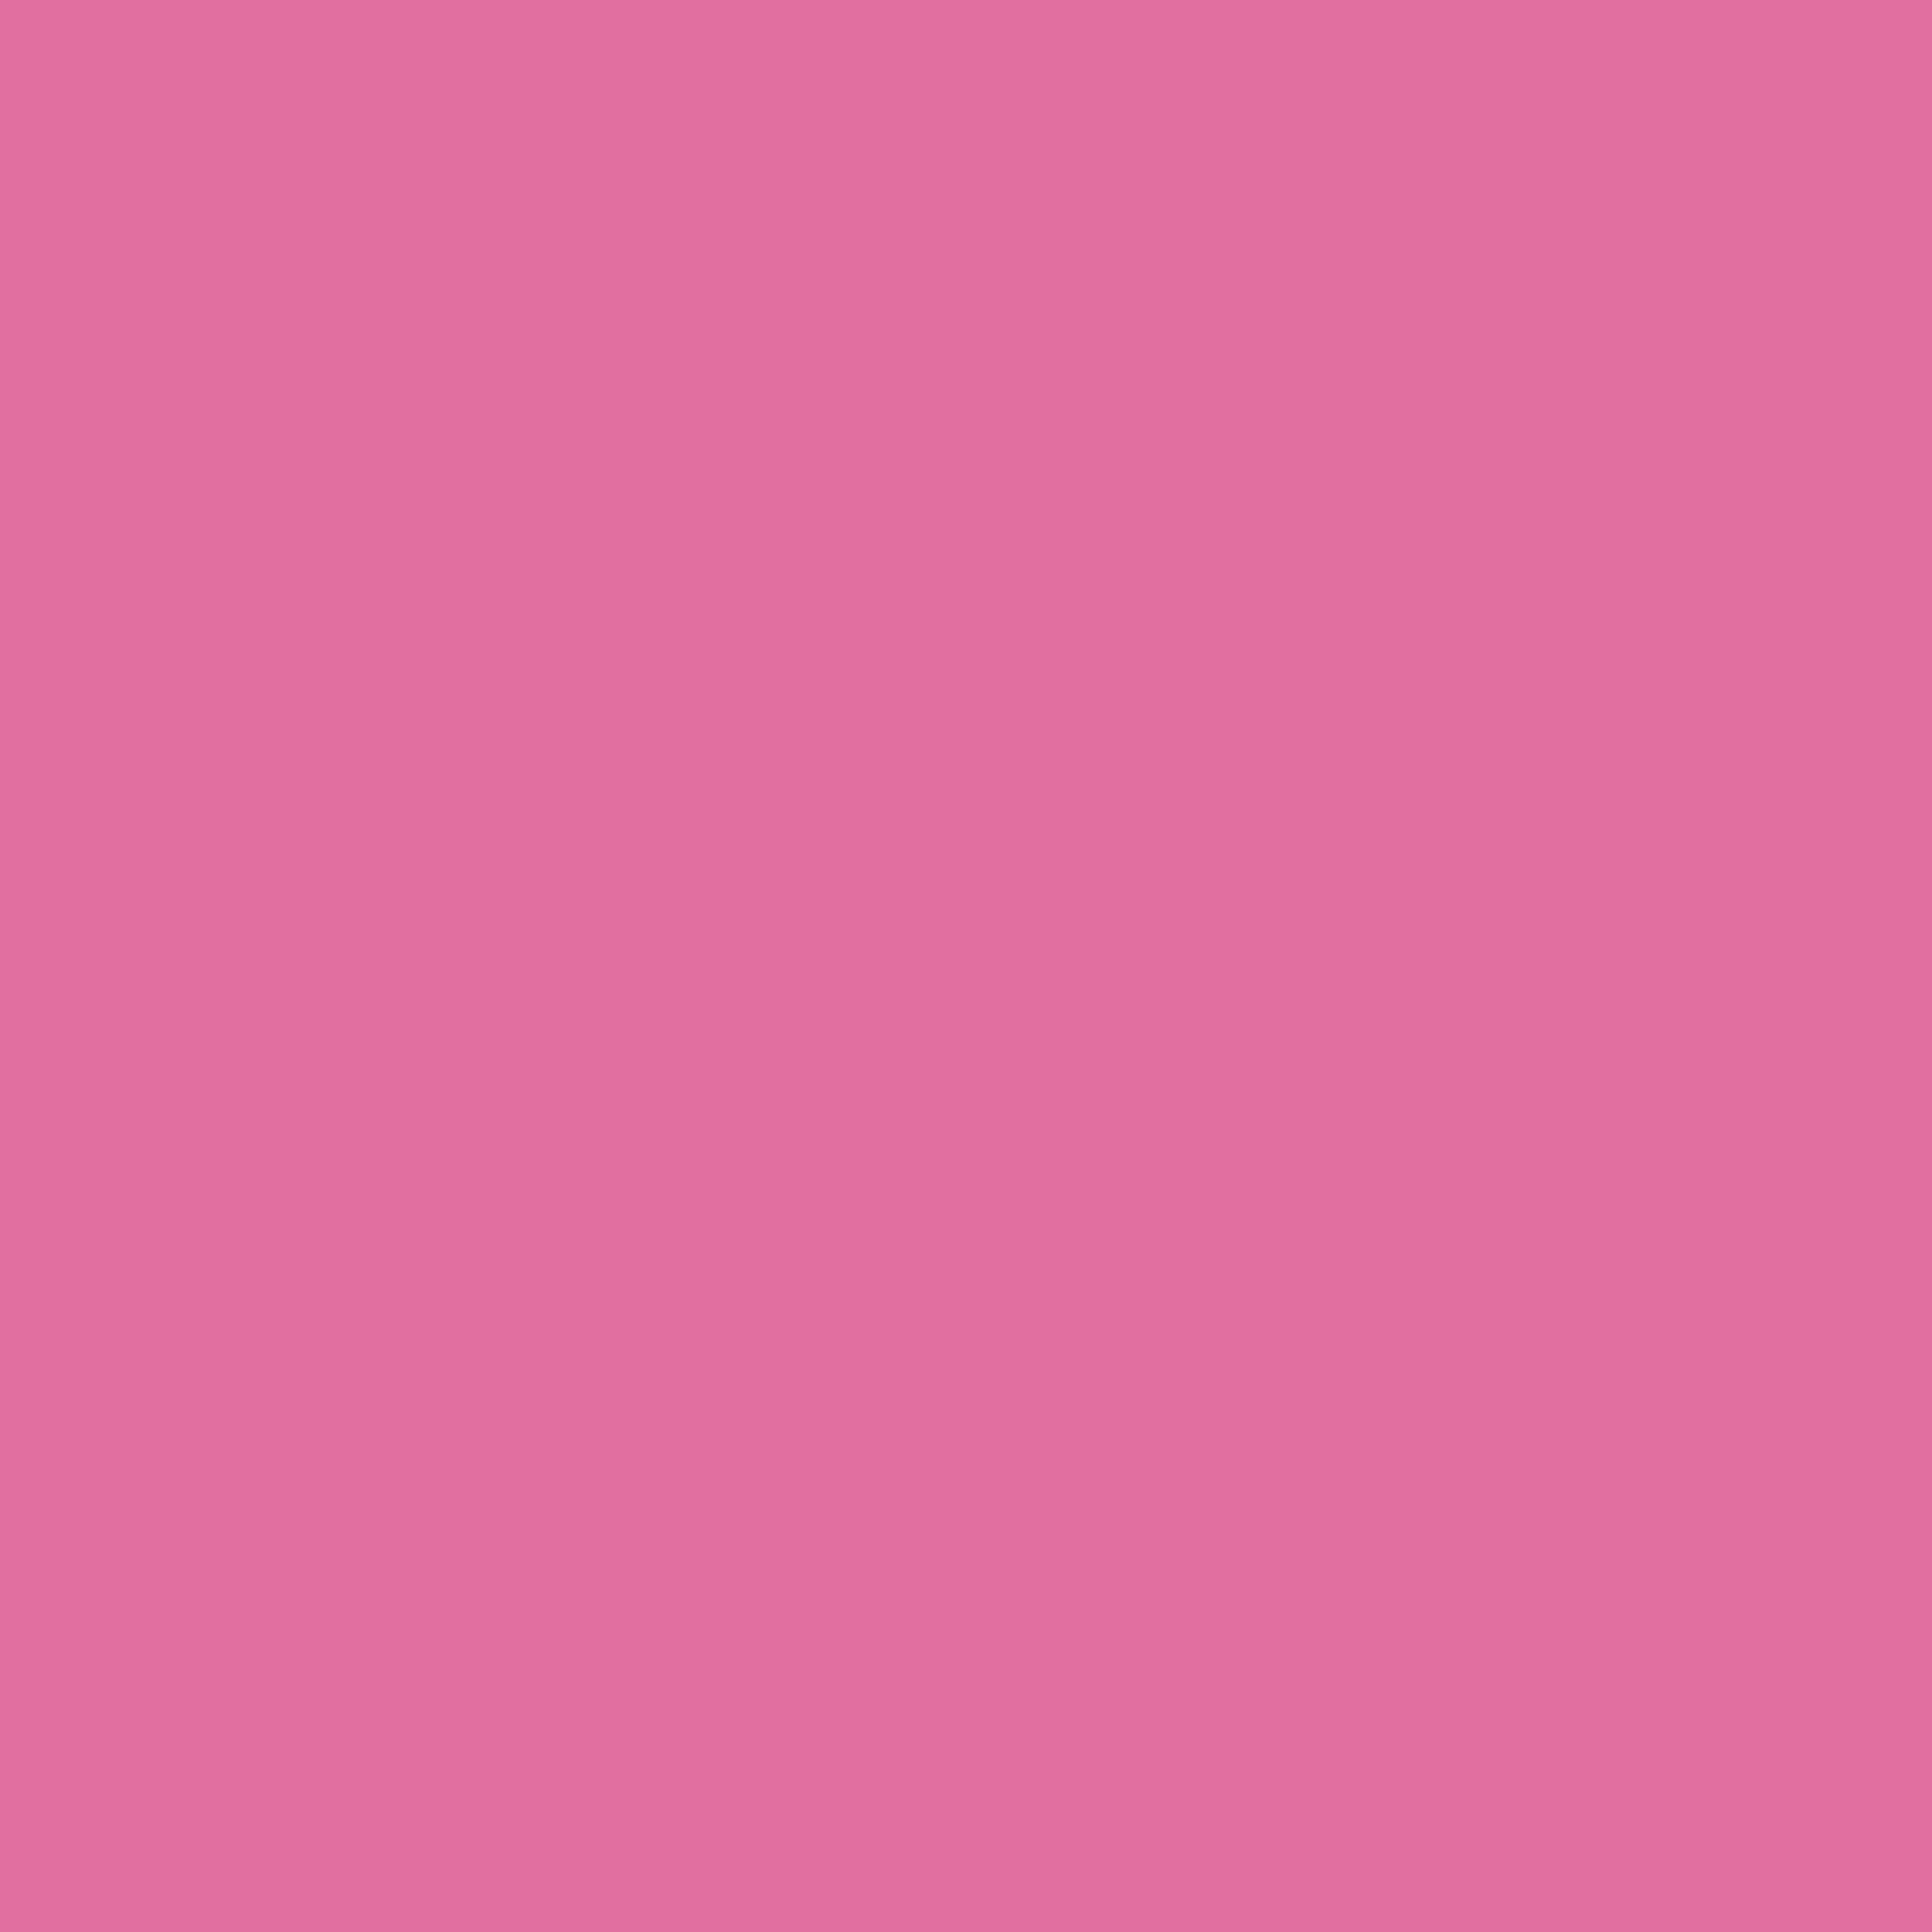 2732x2732 Thulian Pink Solid Color Background